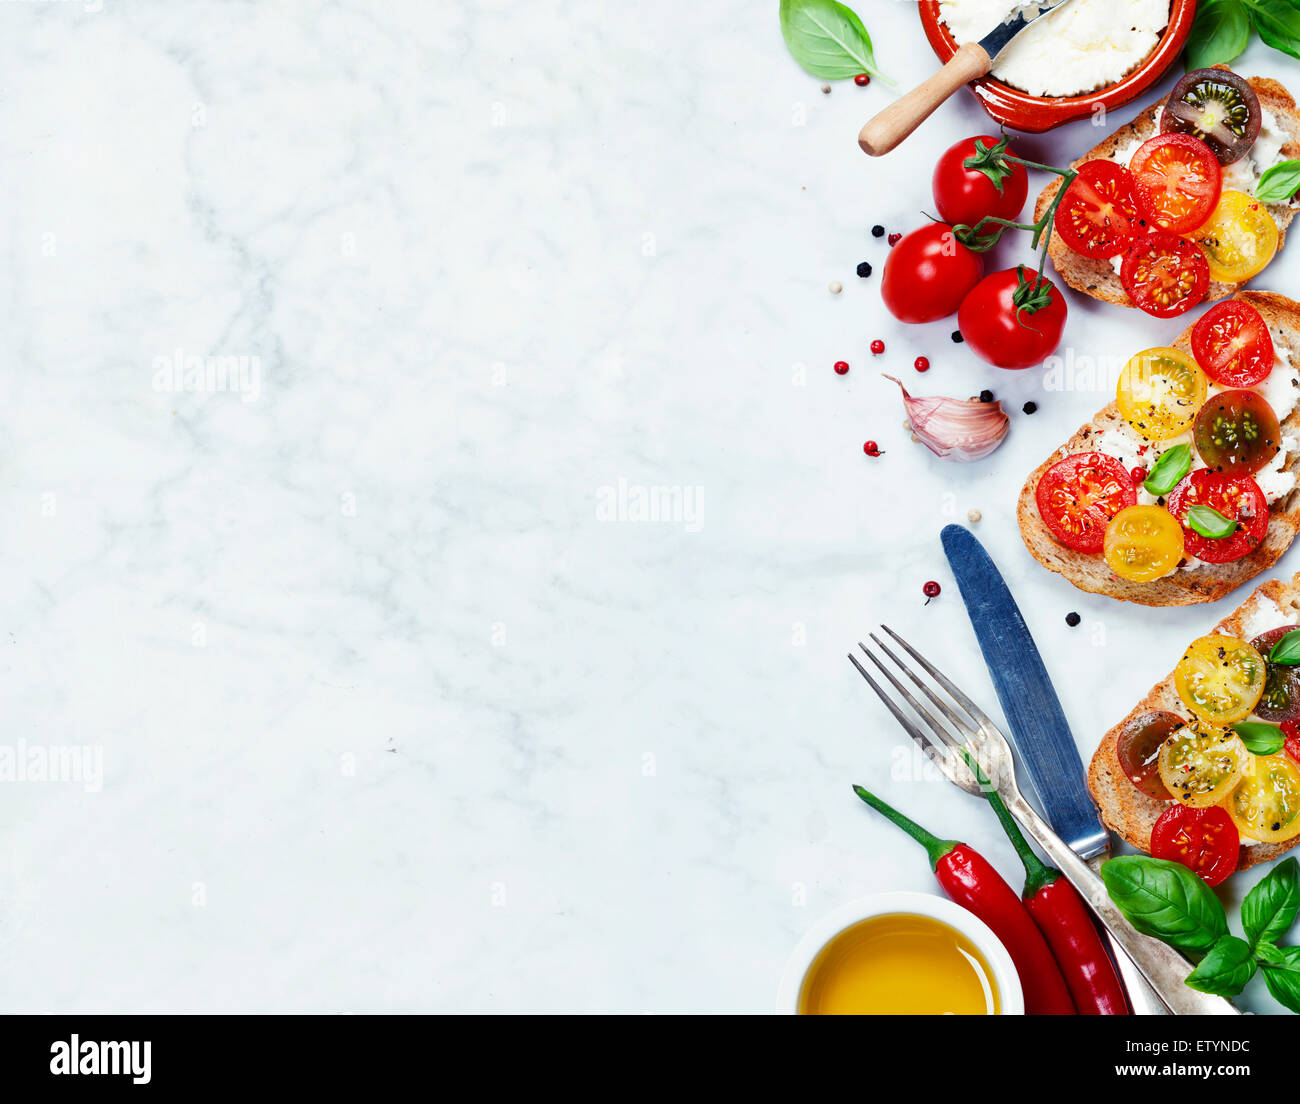 Tomato and basil sandwiches with ingredients - Italian, Vegetarian or Healthy food concept Stock Photo